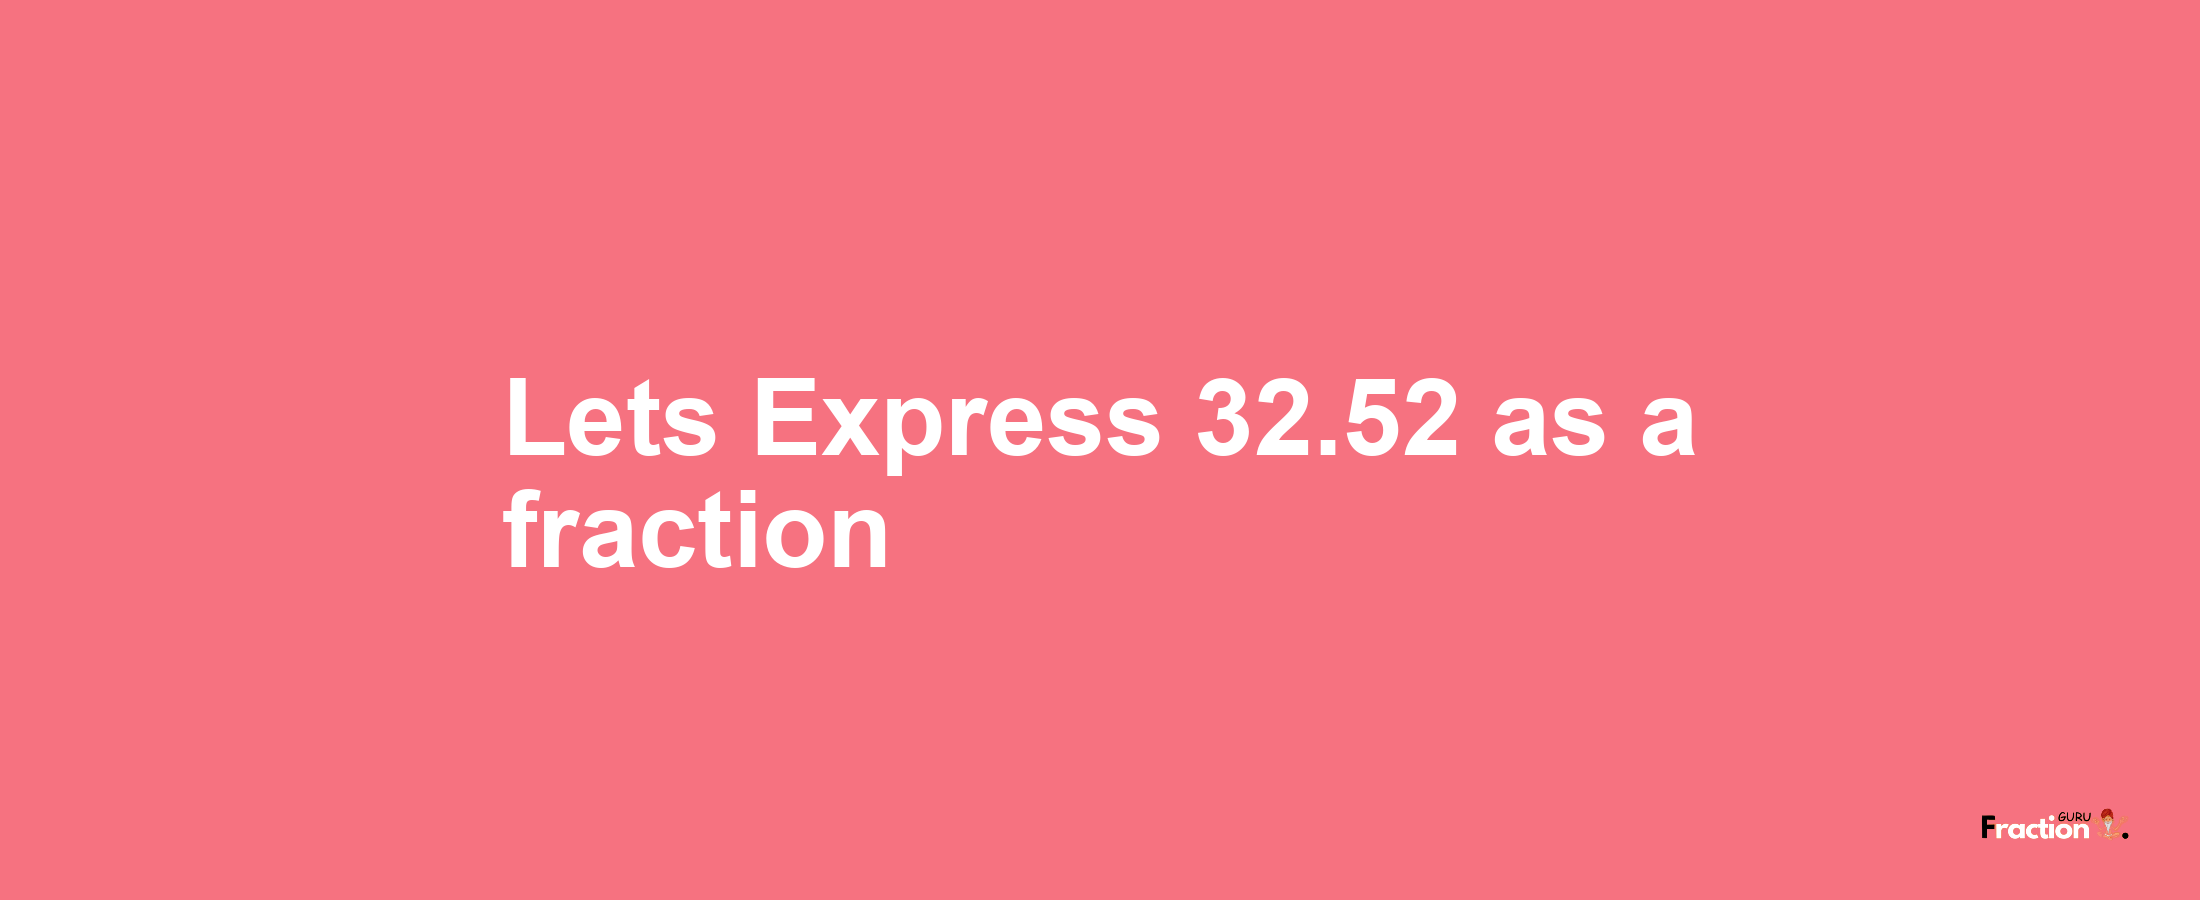 Lets Express 32.52 as afraction